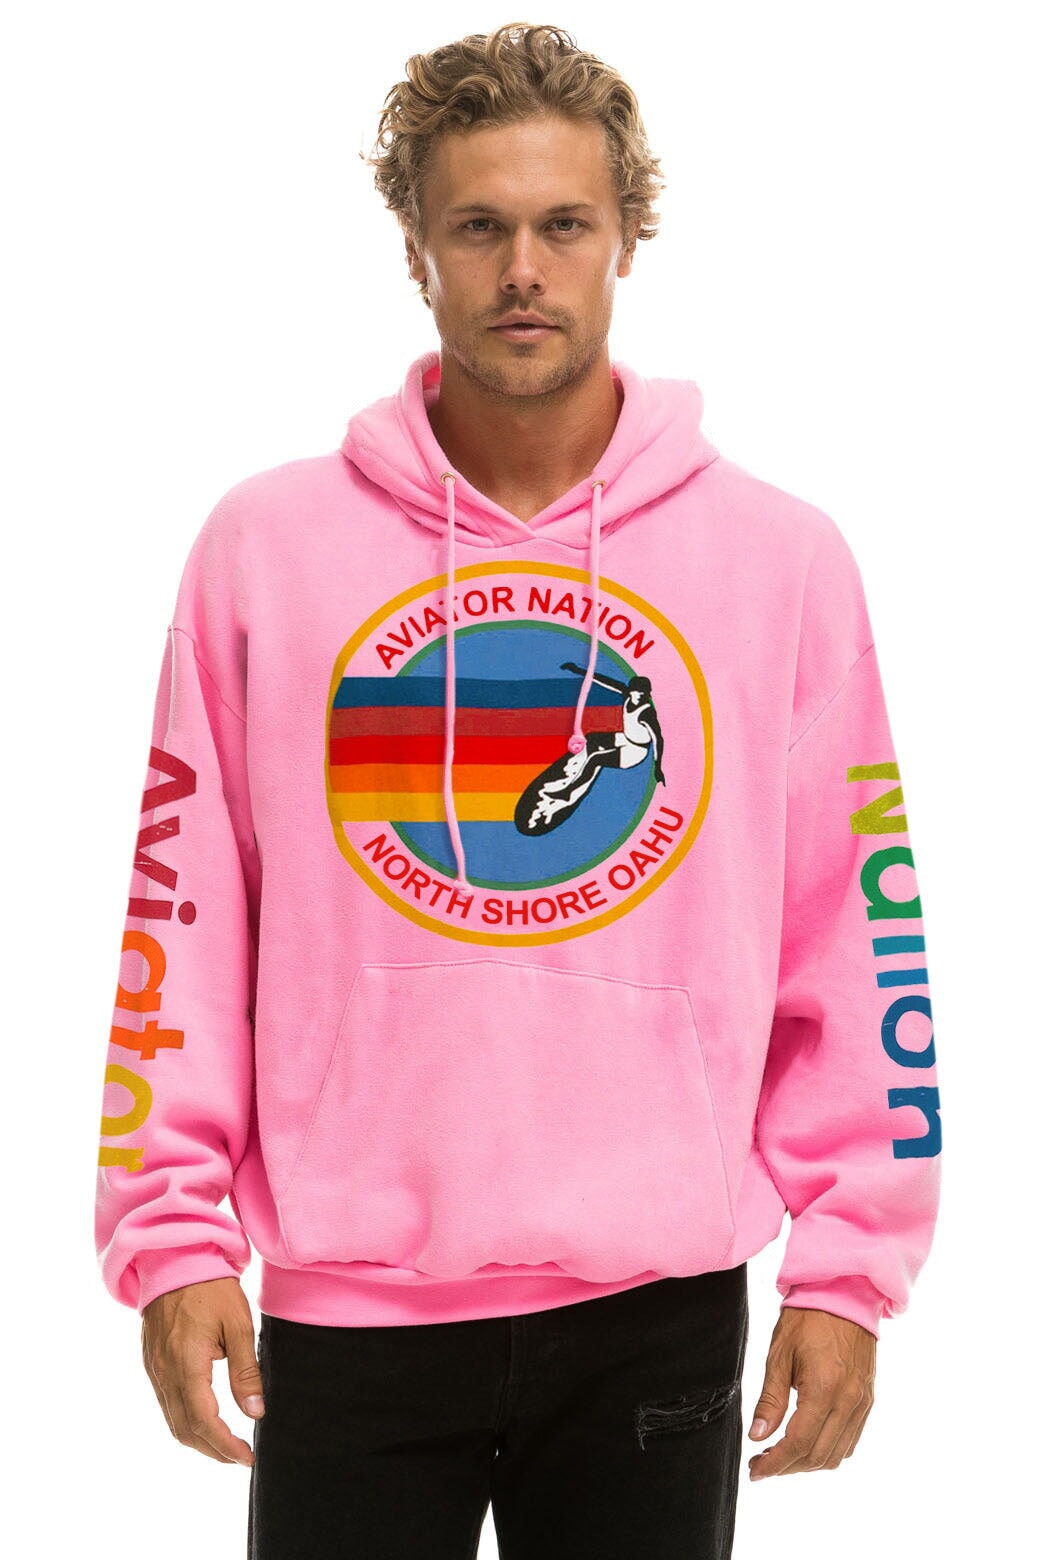 AVIATOR NATION NORTH SHORE RELAXED PULLOVER HOODIE - NEON PINK Hoodie Aviator Nation 